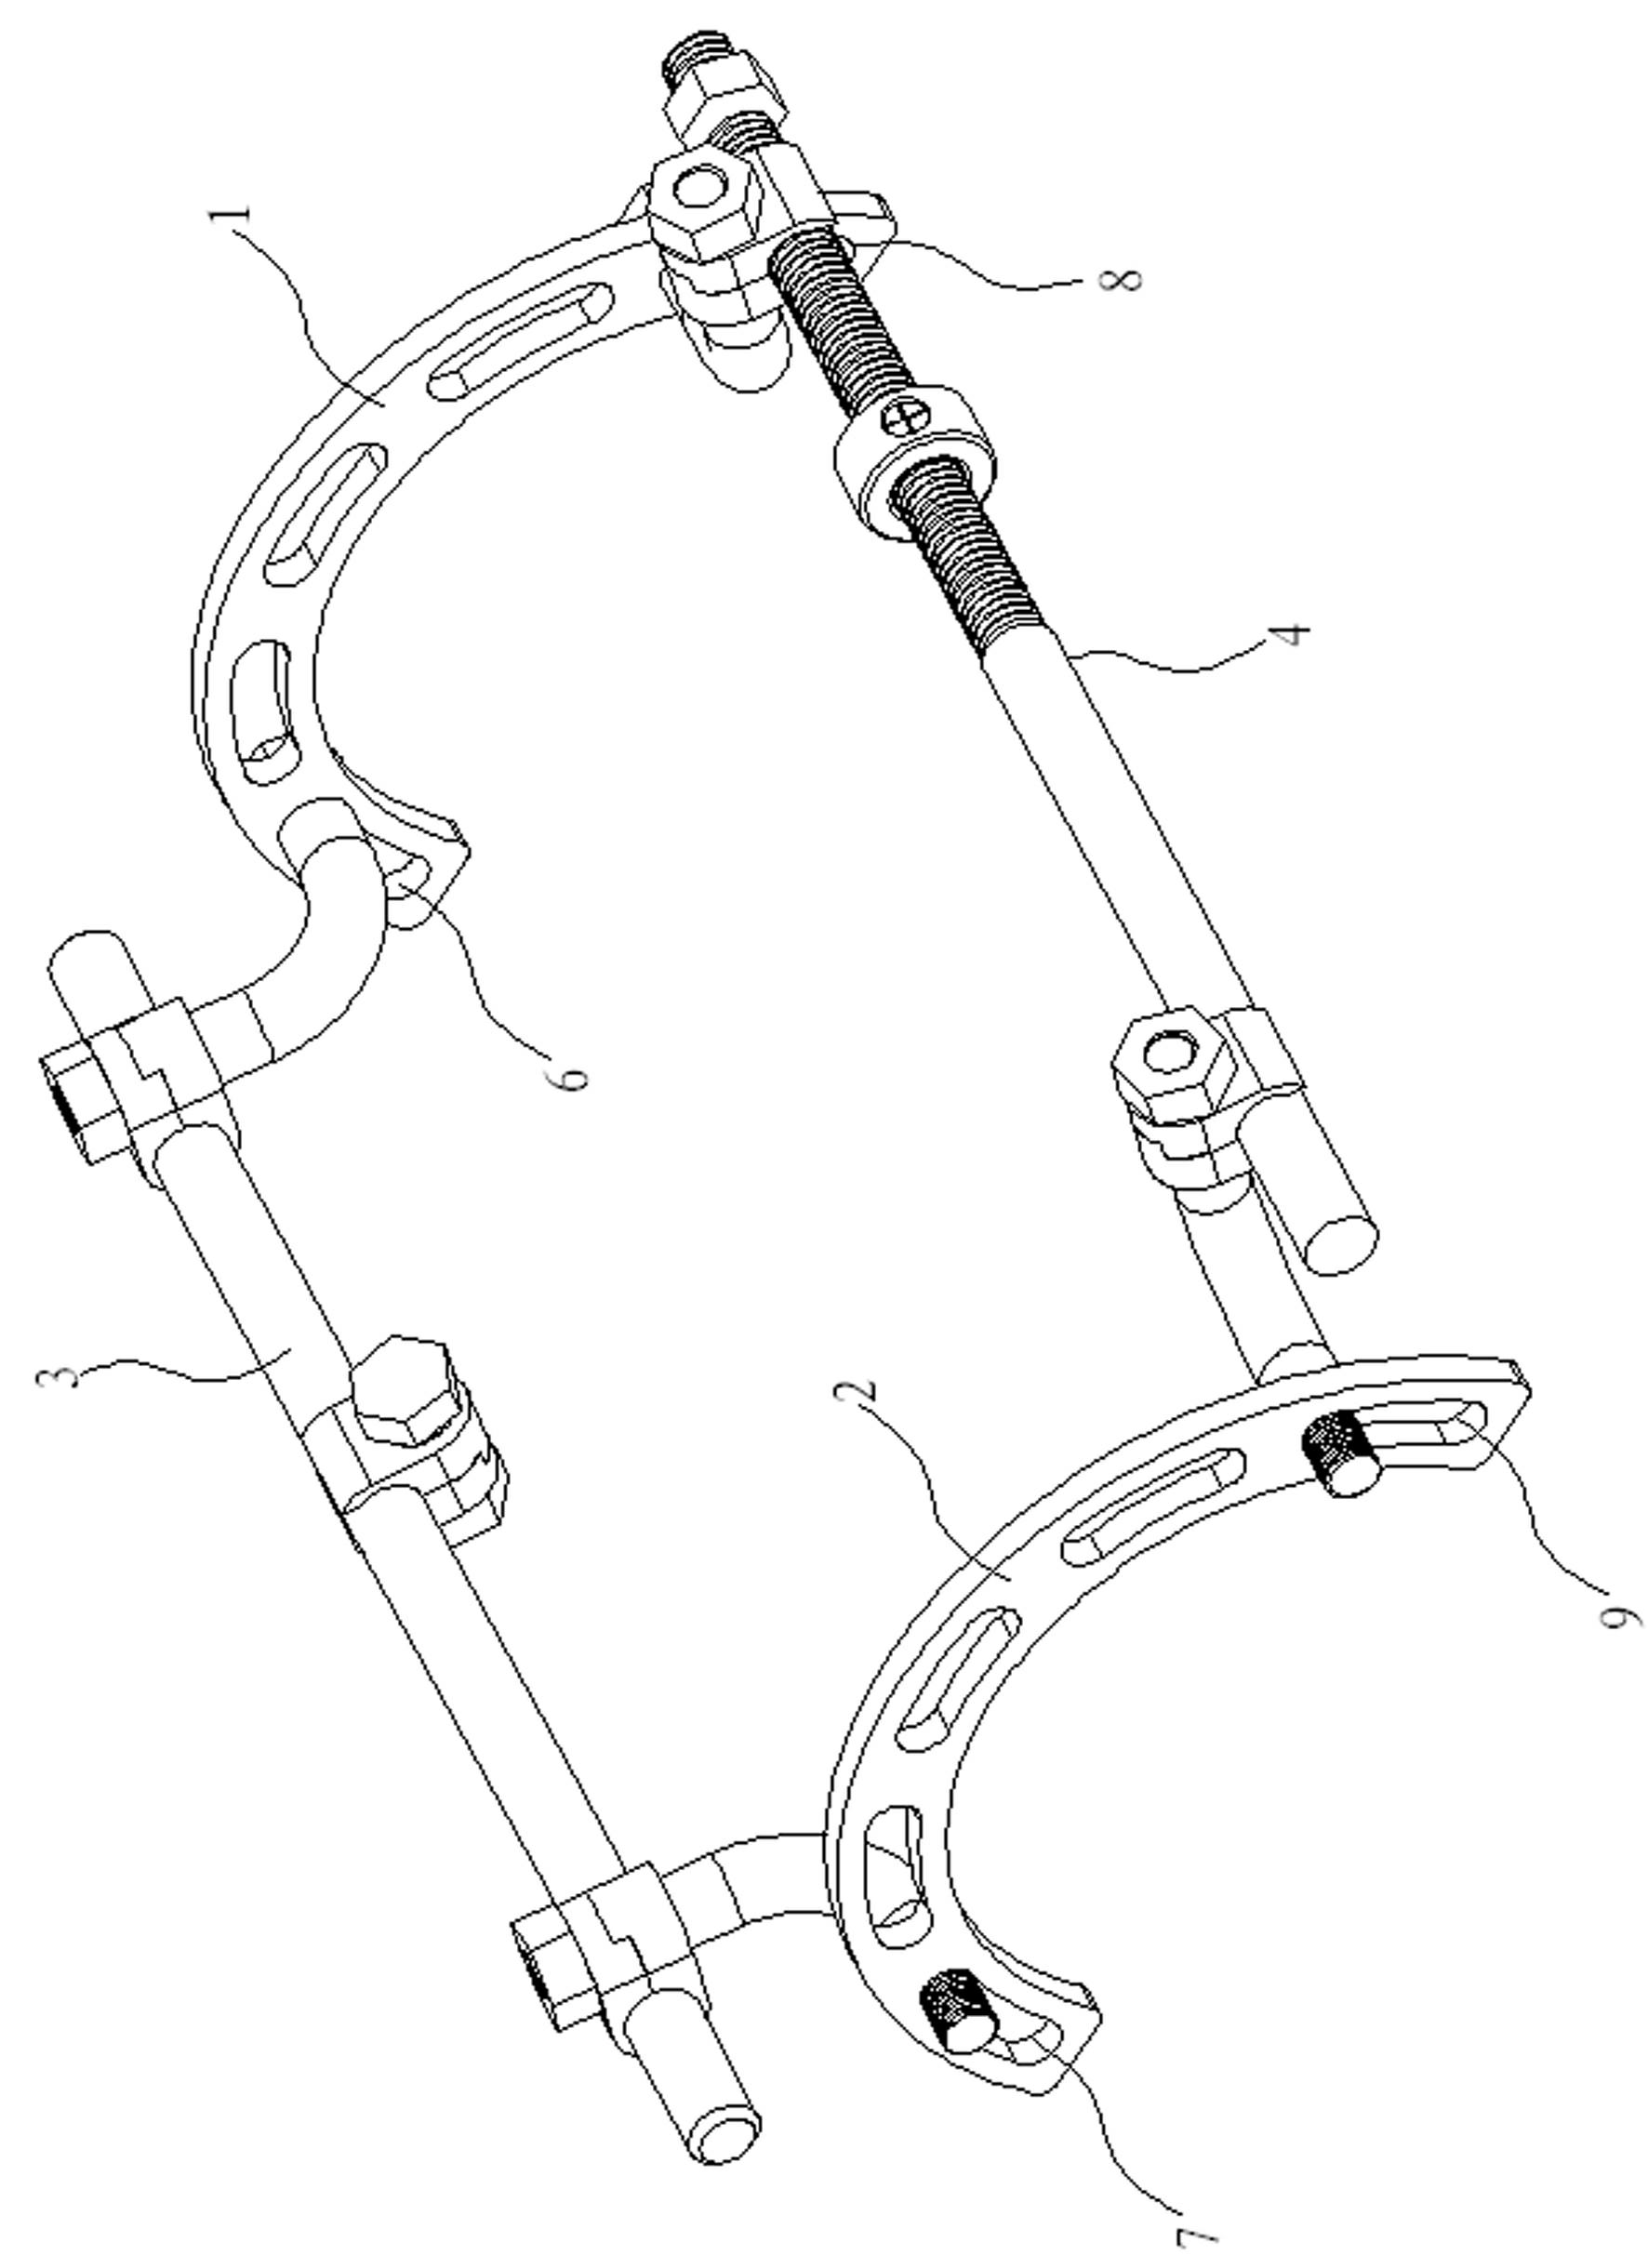 Combined three-dimensional traction mounting bracket for wrist joint